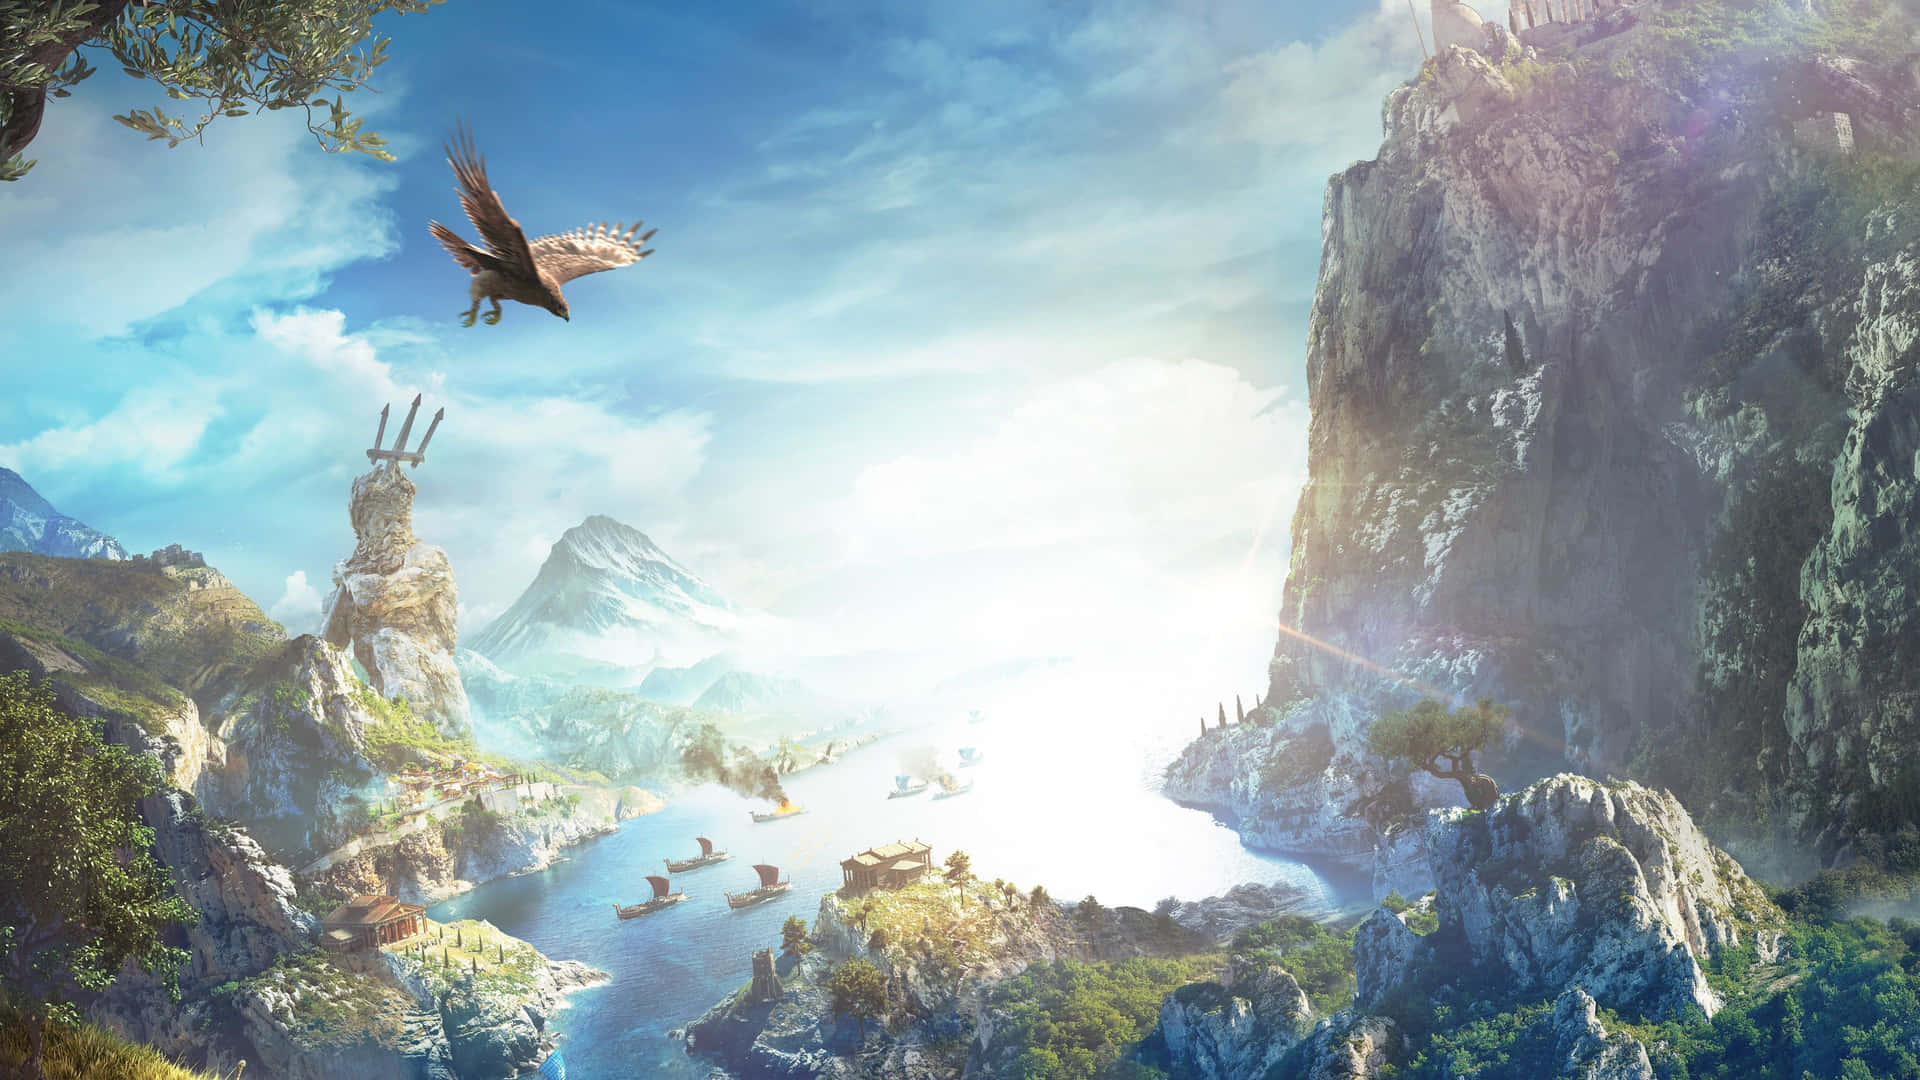 A Fantasy Scene With Birds Flying Over A Mountain